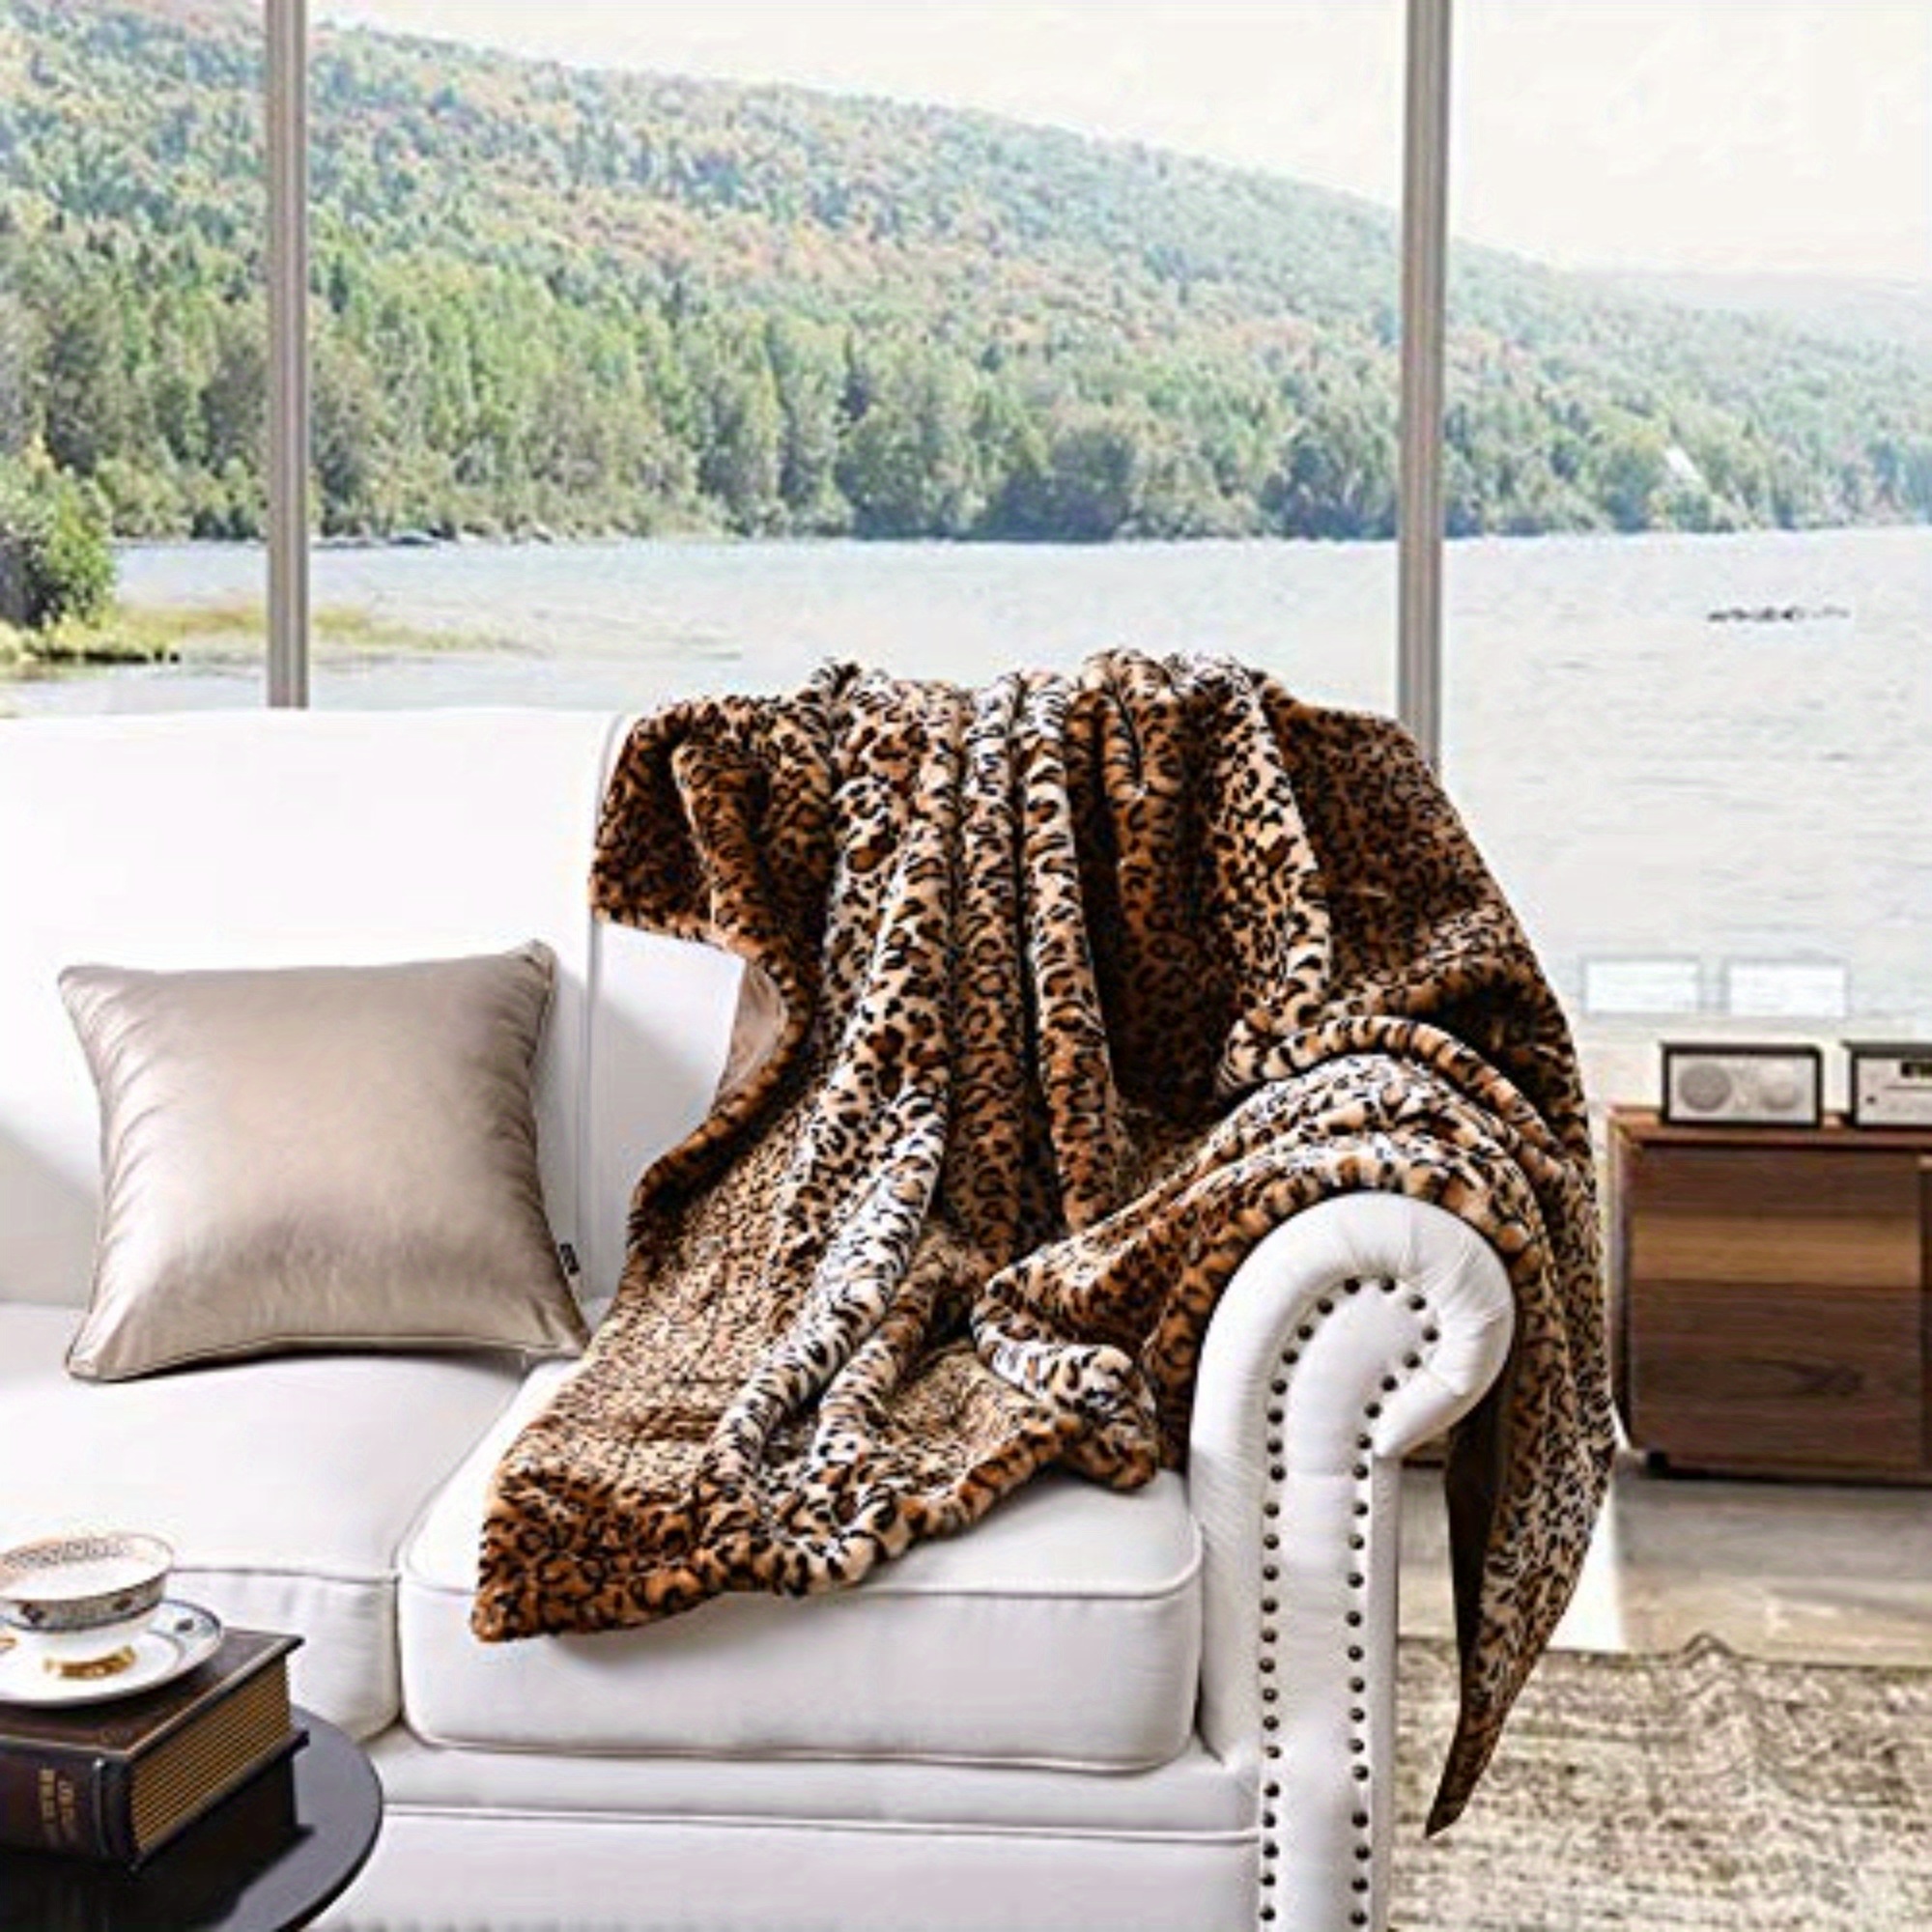 

Faux Fur Throw Blanket Leopard Bed Blanket 50"x70" Super Soft Warm Reversible With Flannel Fleece Fuzzy Printed Blanket